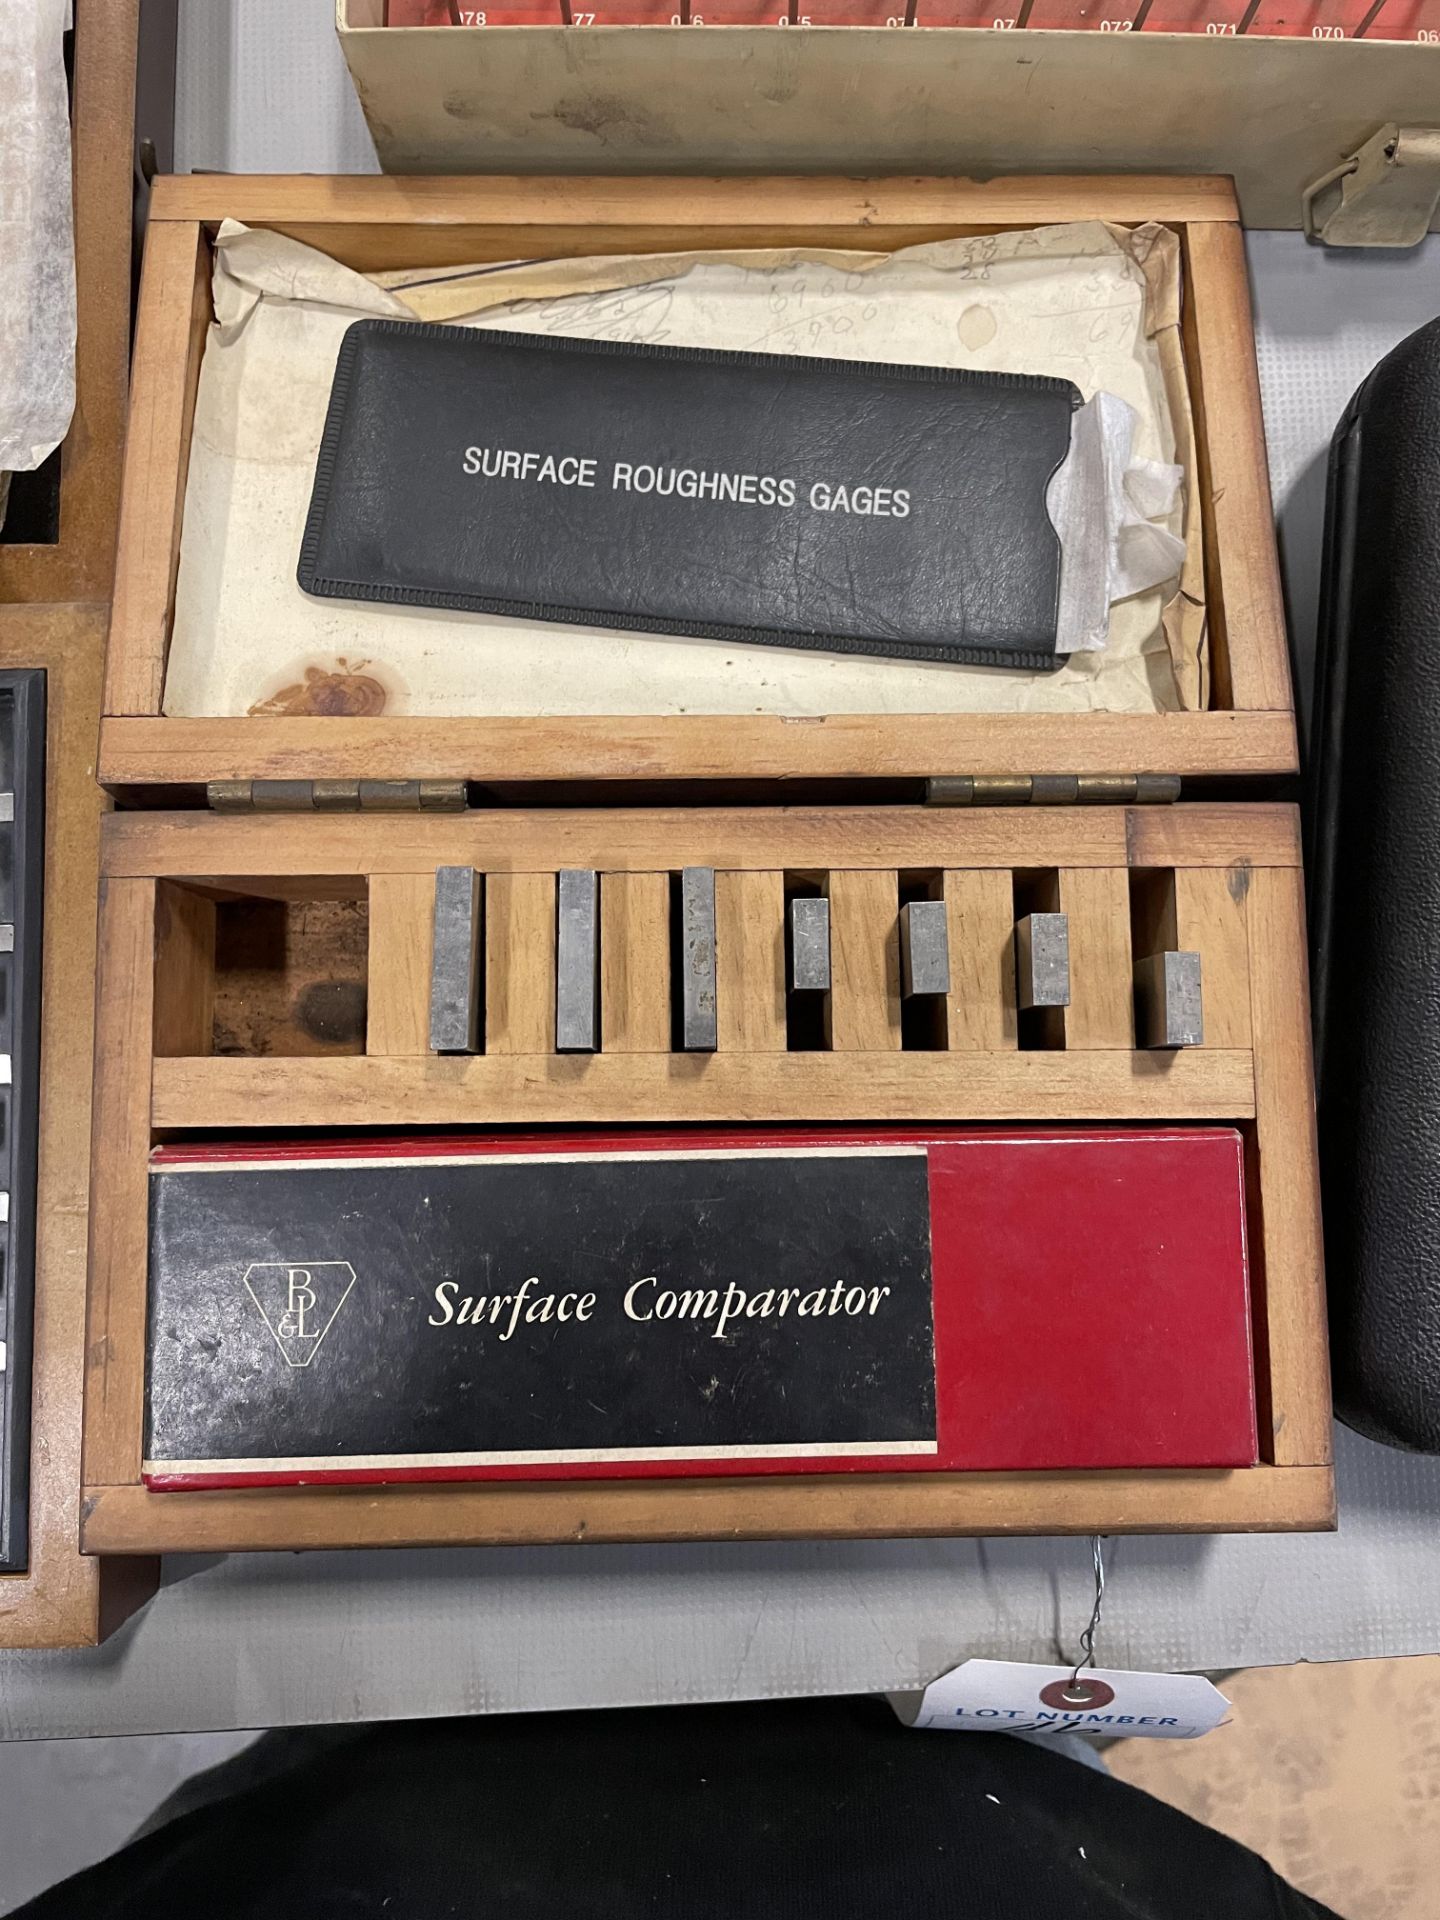 Block Gauge Set w/Surface Roughness Gauge & Surface Comparitor (Missing Some Pieces)